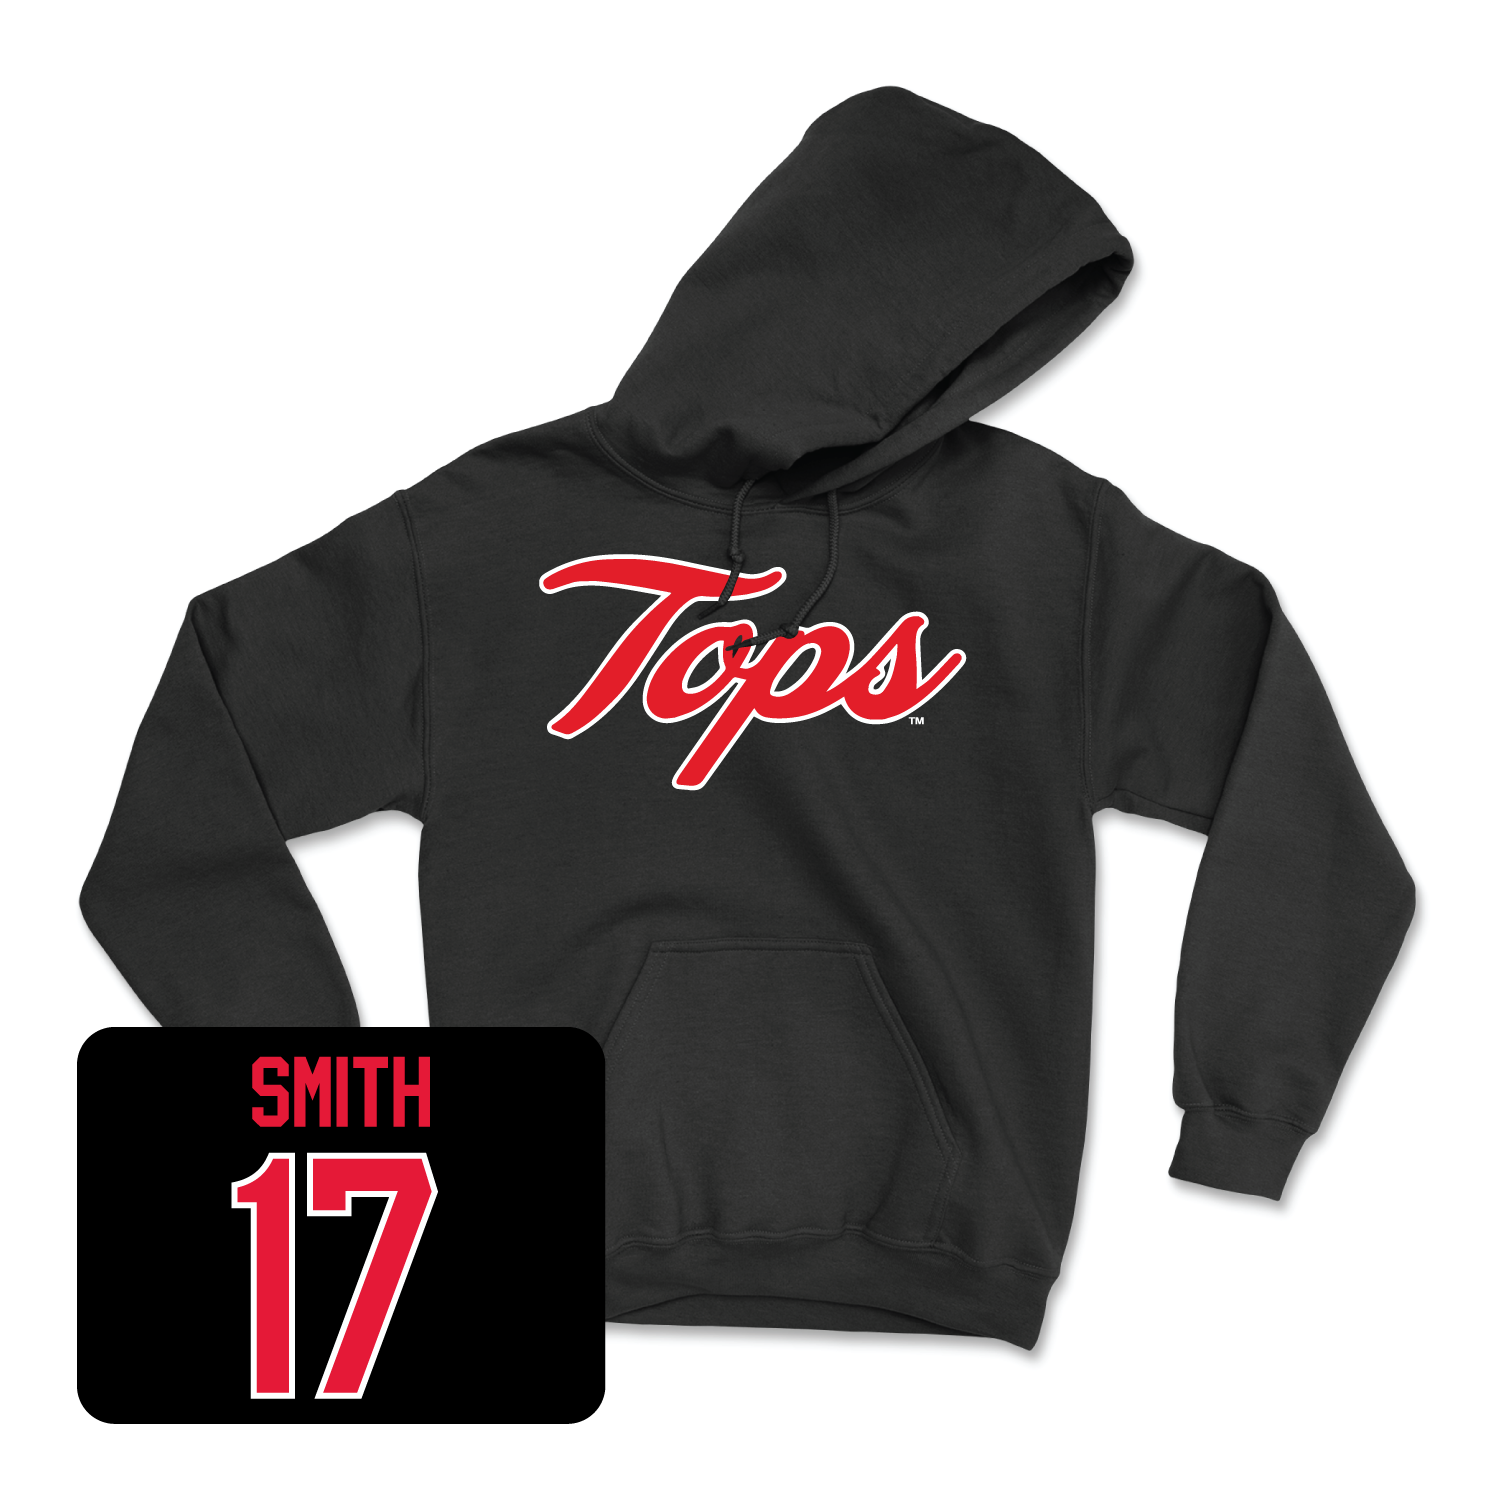 Black Football Tops Hoodie 2 4X-Large / Dalvin Smith | #17